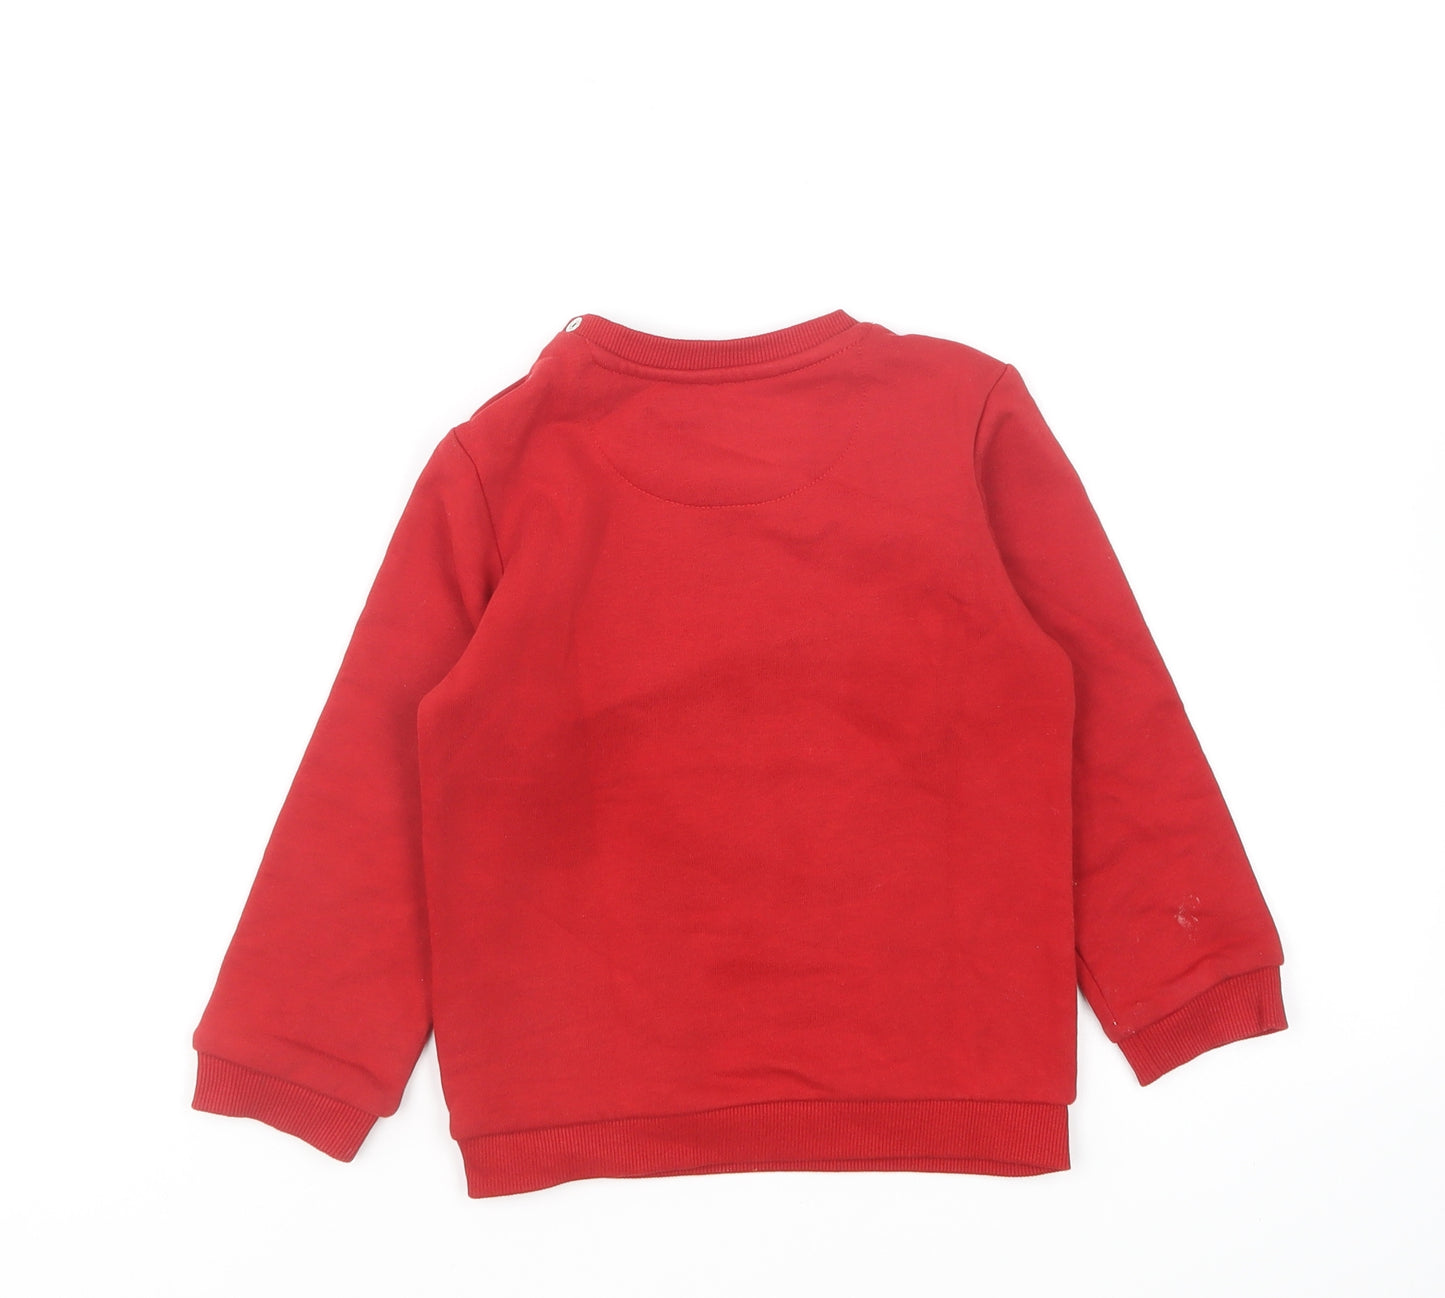 Marks and Spencer Boys Red Cotton Pullover Sweatshirt Size 2-3 Years Pullover - Reindeer